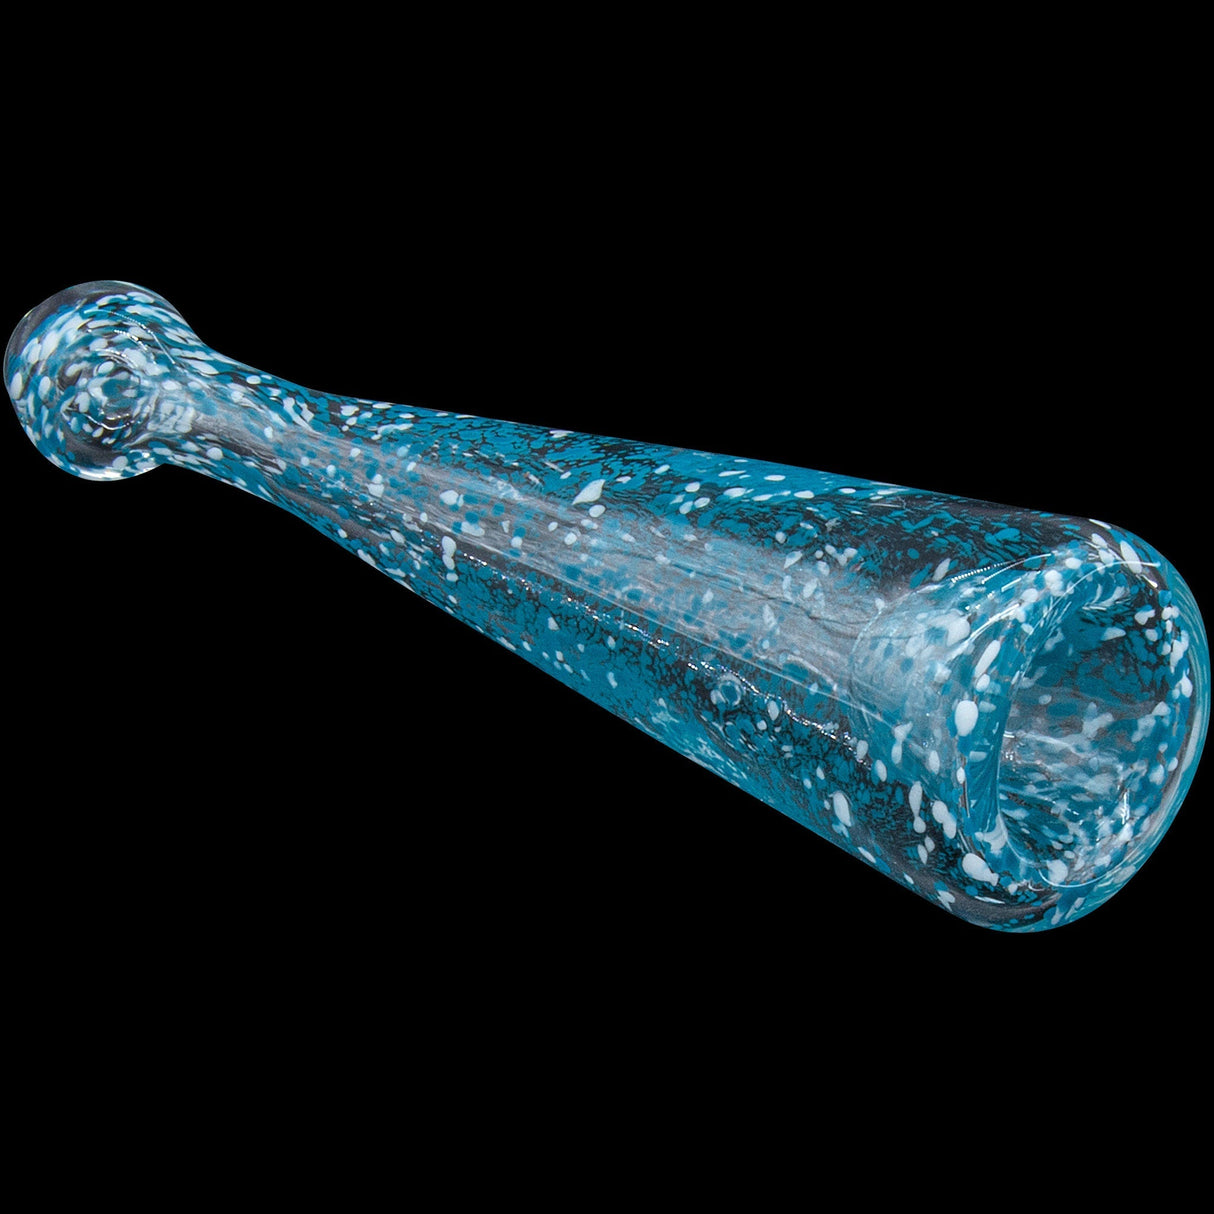 LA Pipes "Magic Dust" Frit Chillum - 4.5" Borosilicate Glass Hand Pipe for Dry Herbs, USA Made